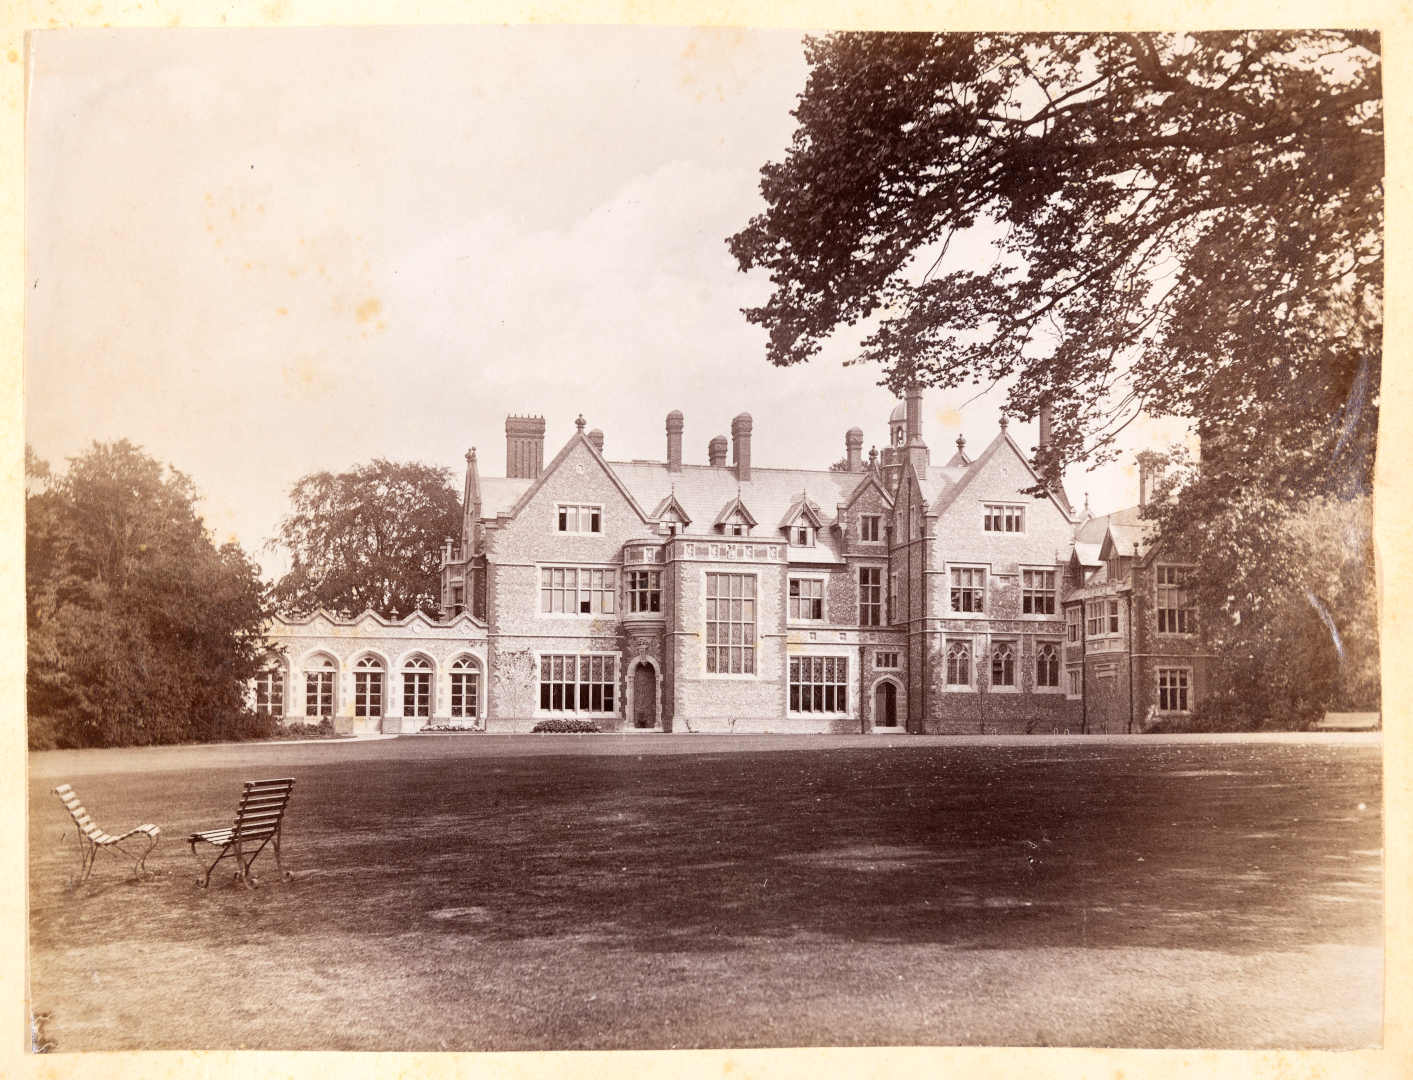 Photograph of Holme Park building reference D/EX2645/1